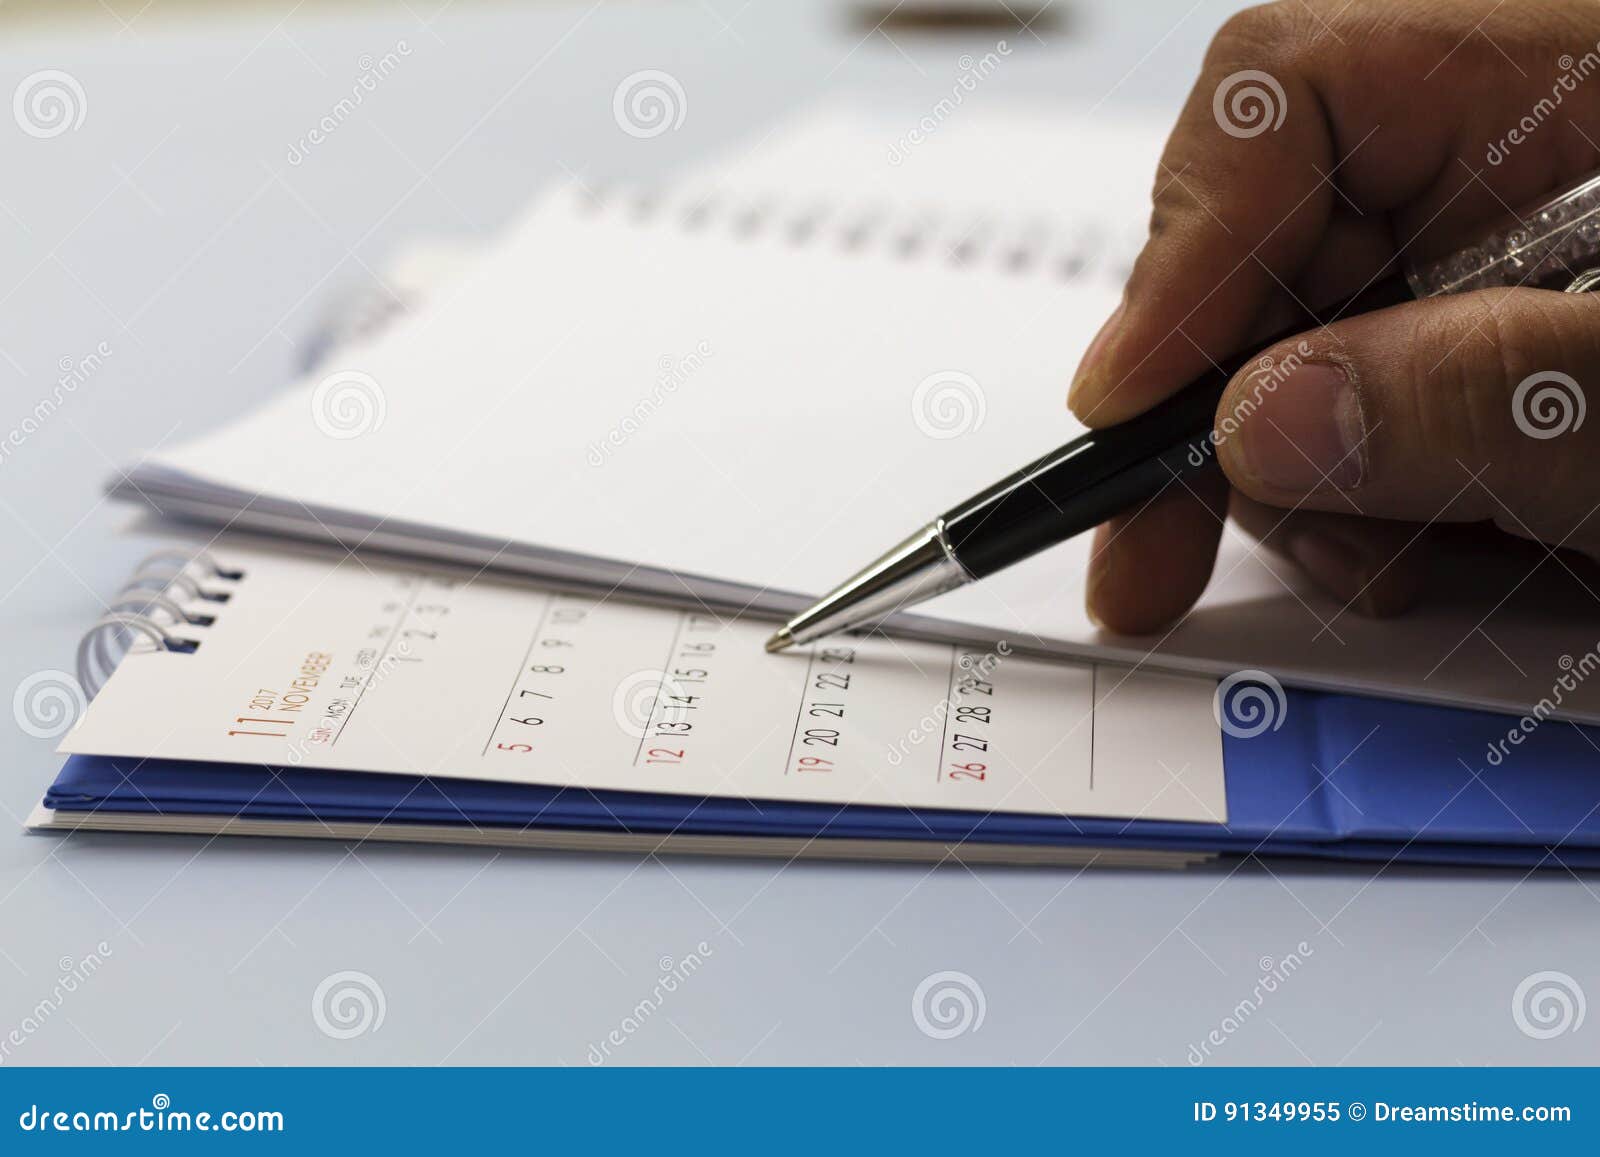 Planning Calendar On The Office Desk Stock Image Image Of